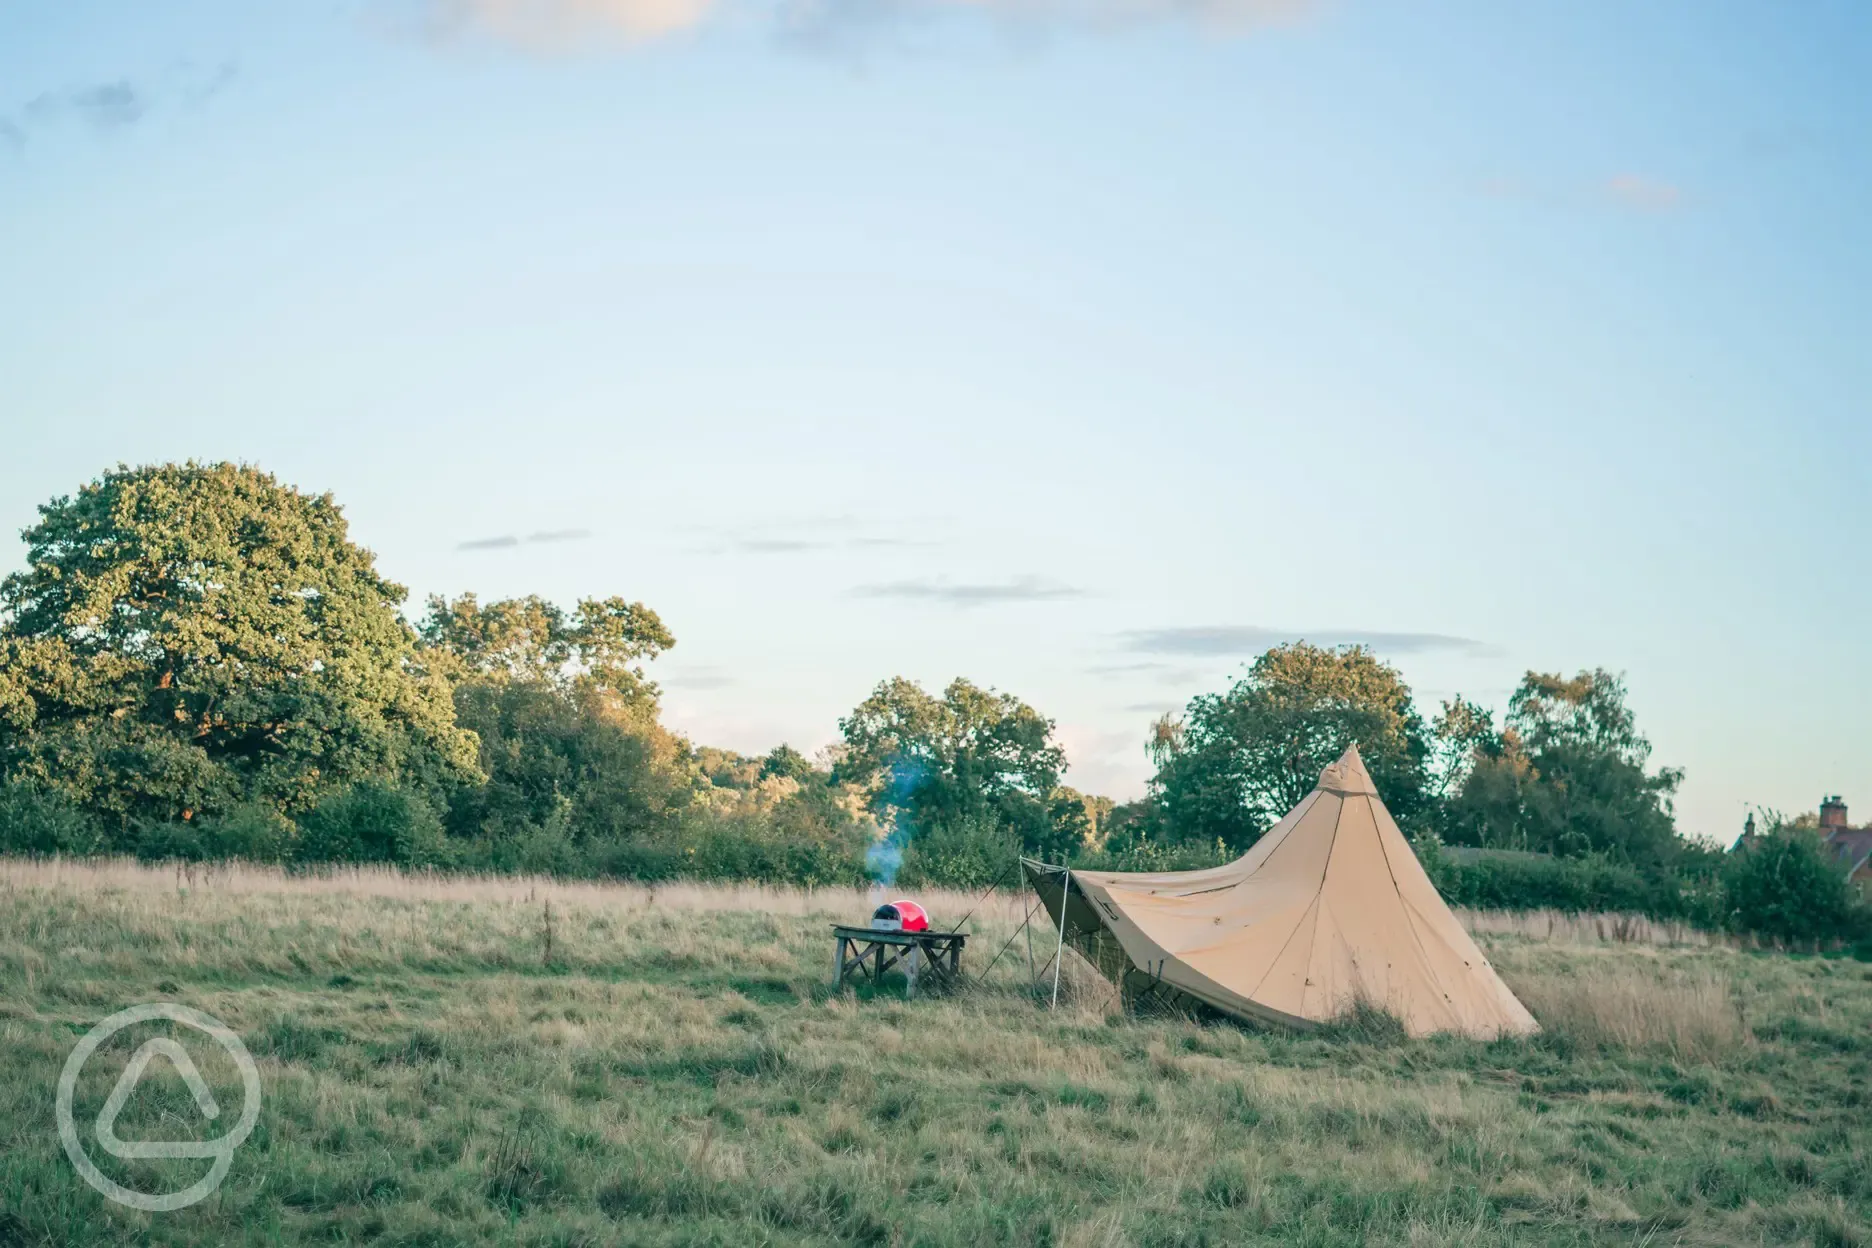 Pizza oven and communal tipi